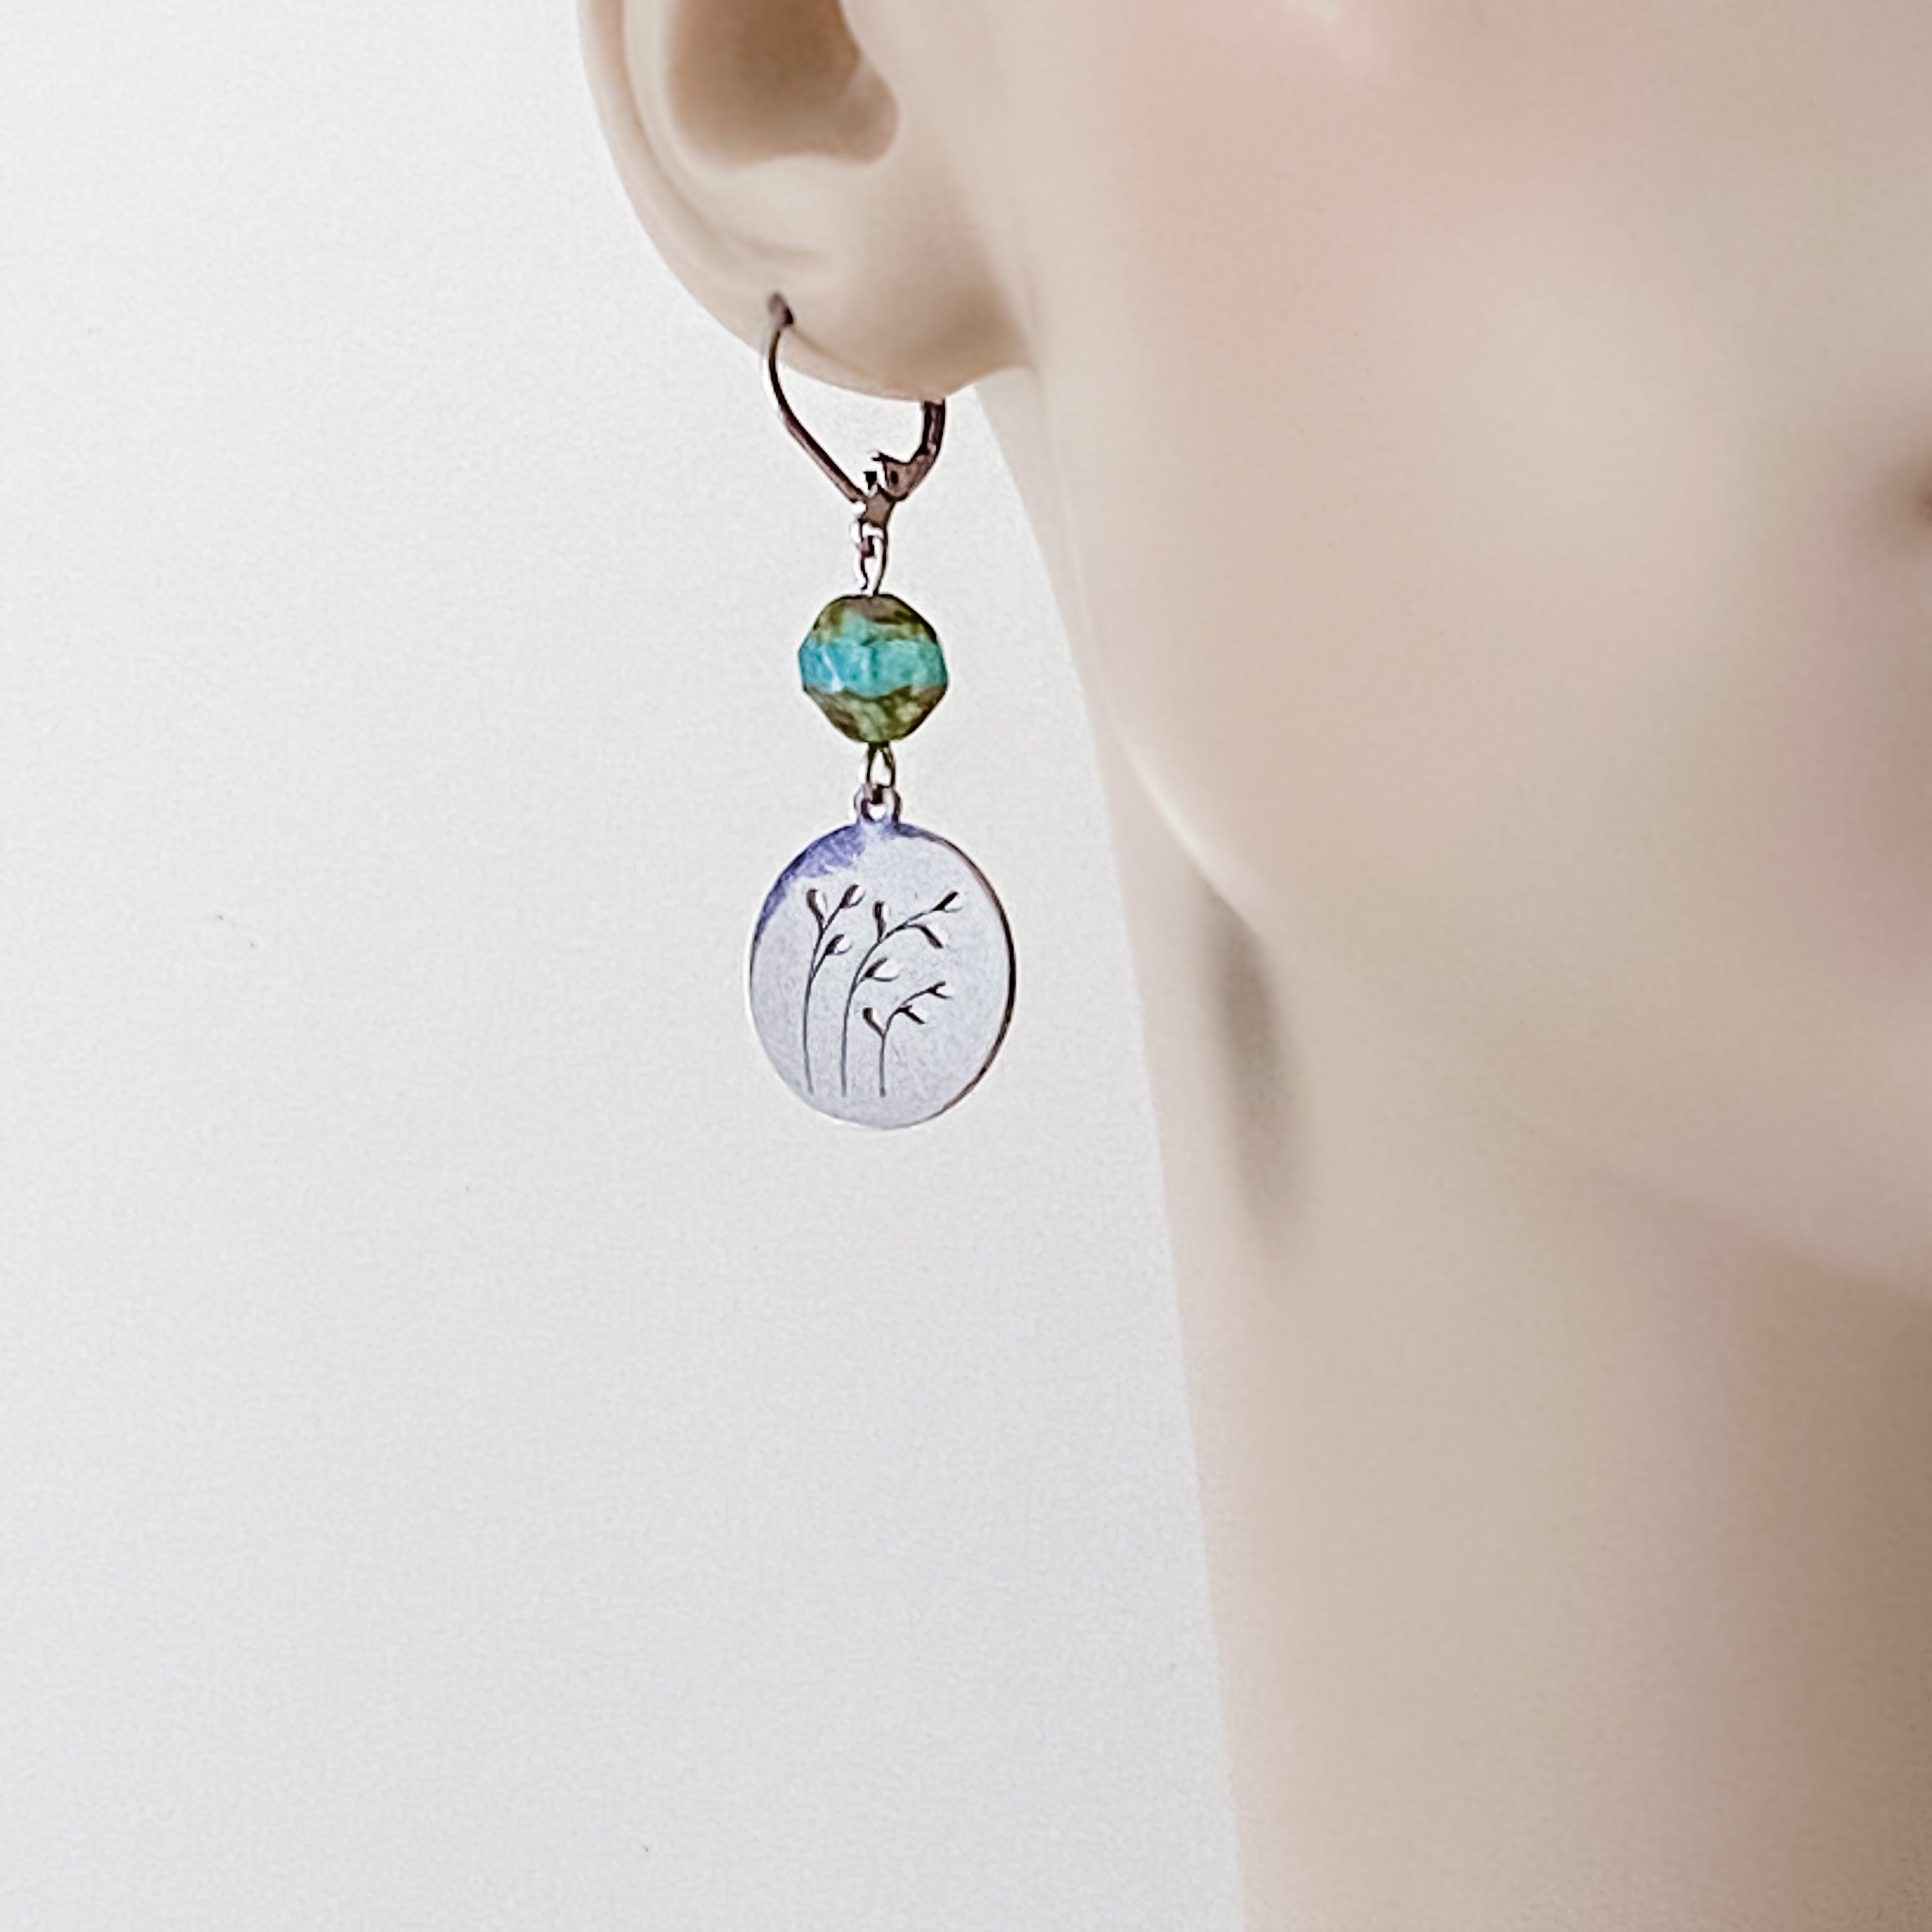 Surgical Steel Charm Earrings - Circle with Cut Out Leaves Uni-T